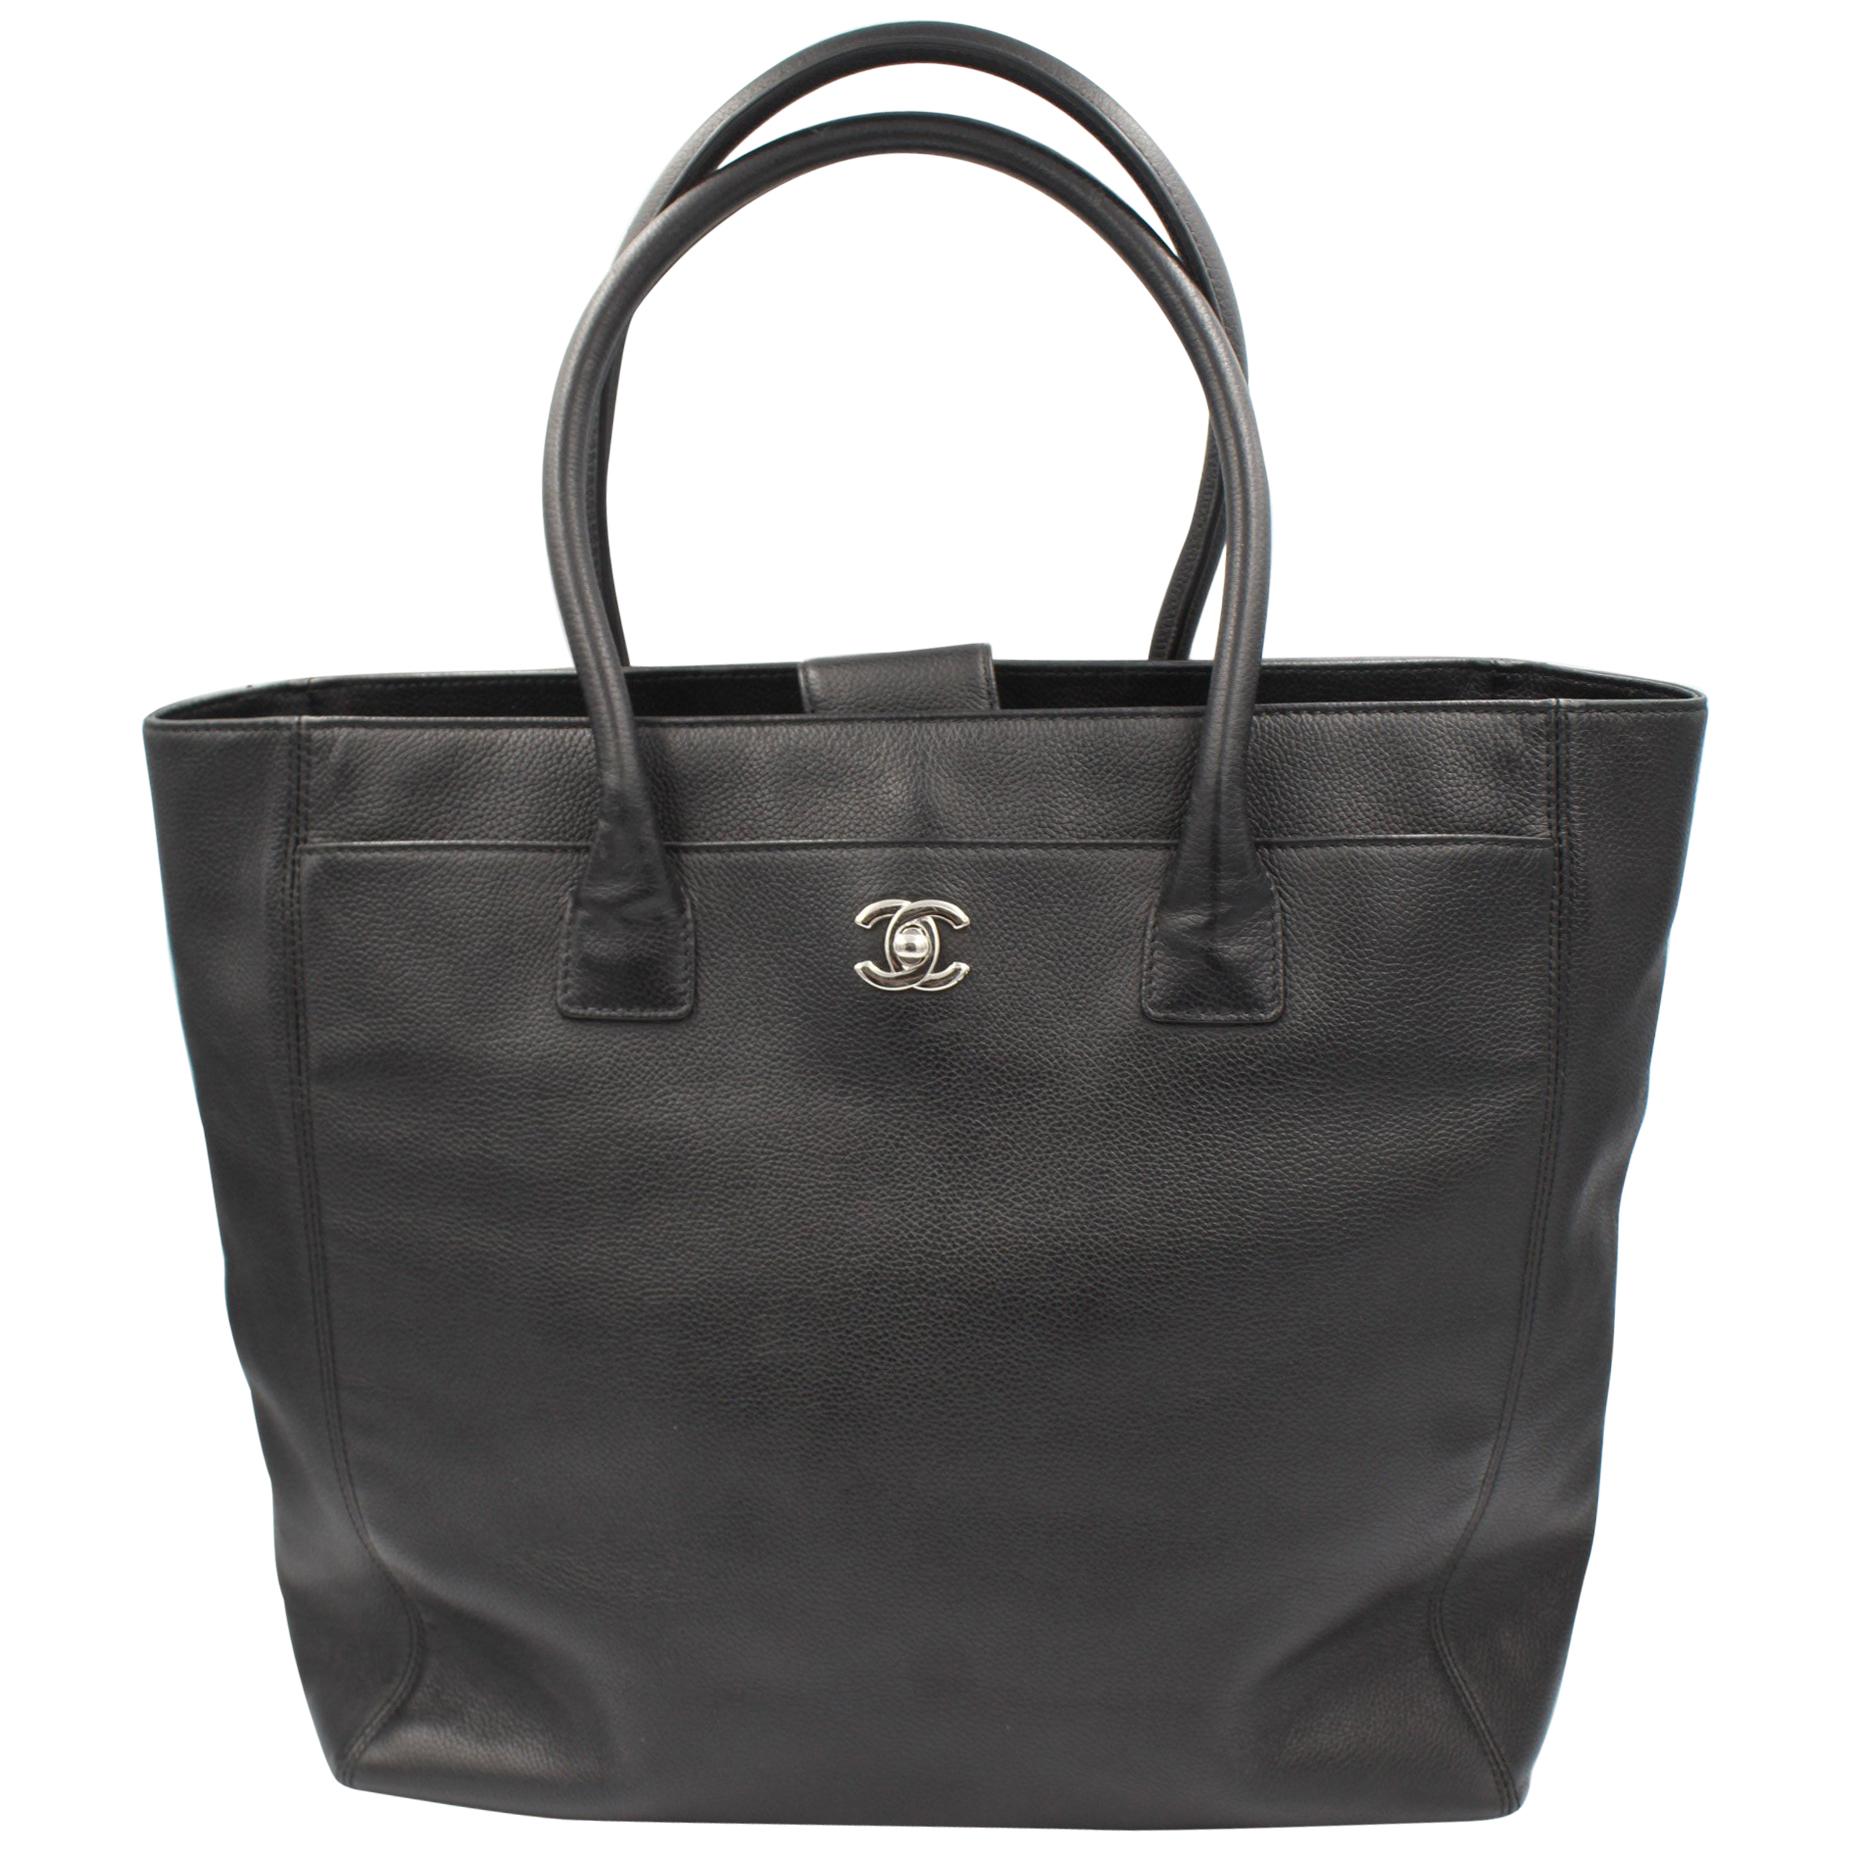 Chanel Tote Black Grained Letaher Bag and Silver Hardware